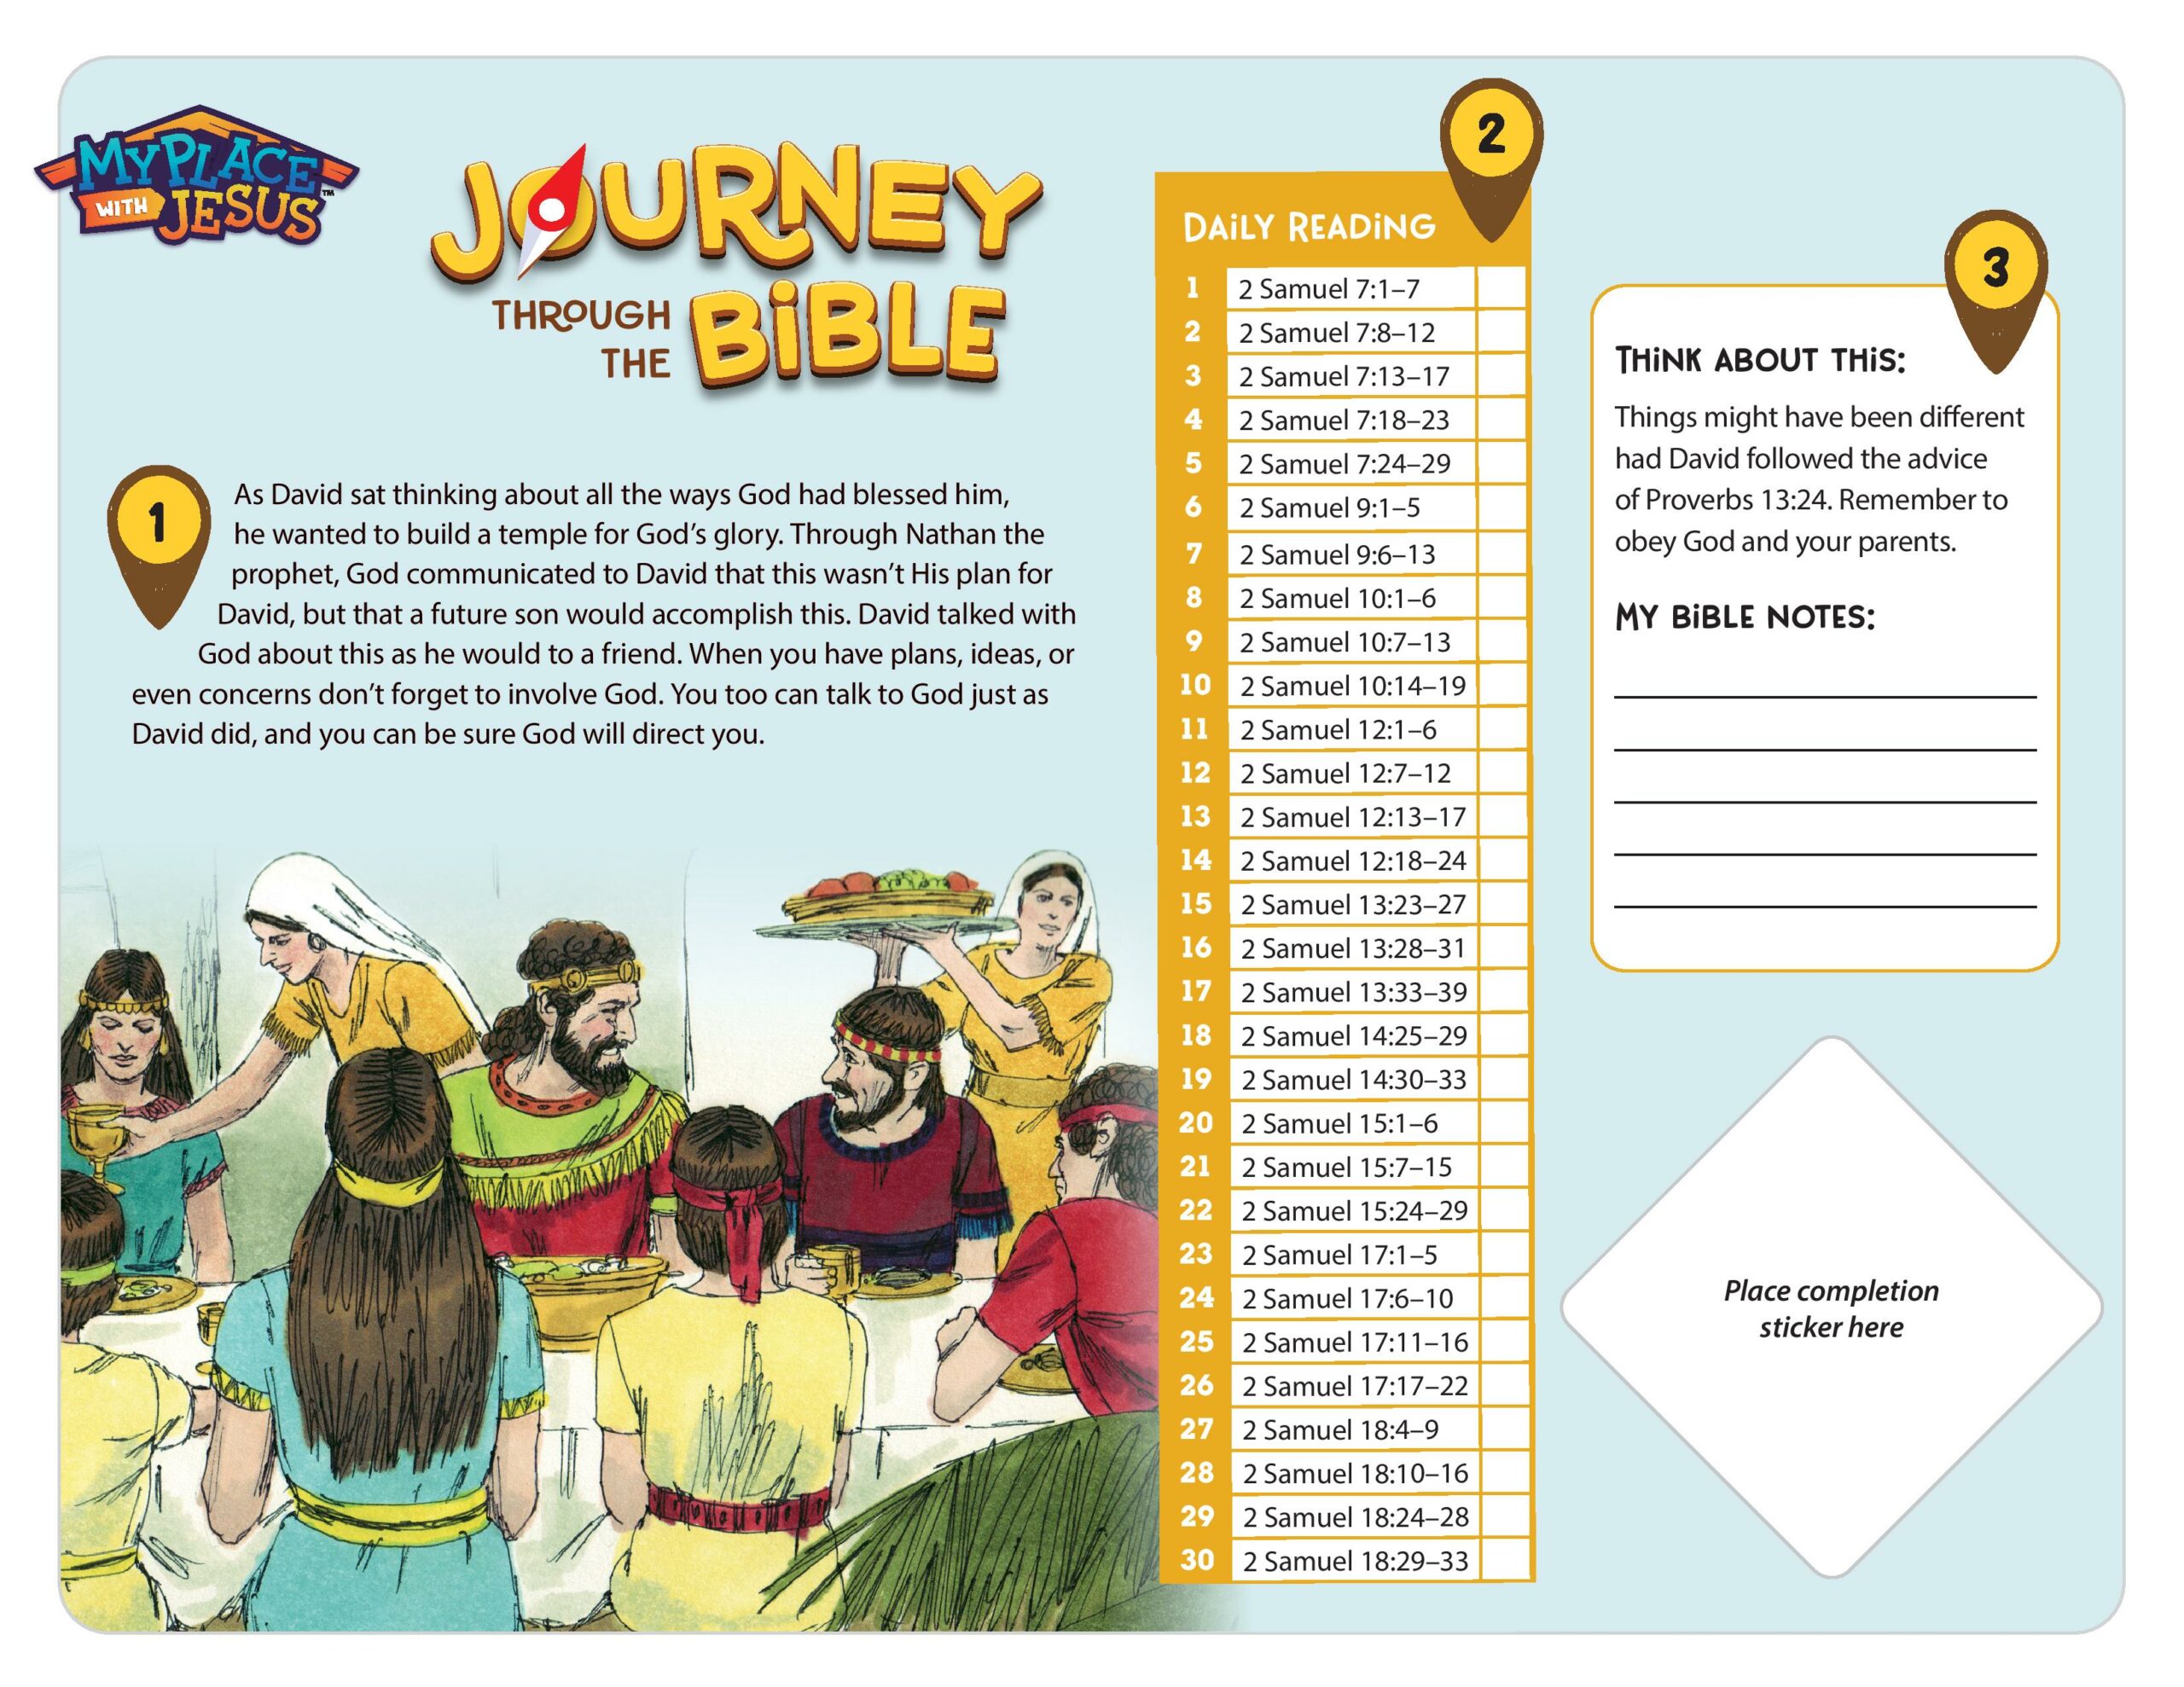 Journey through the Bible 17 tracking sheet